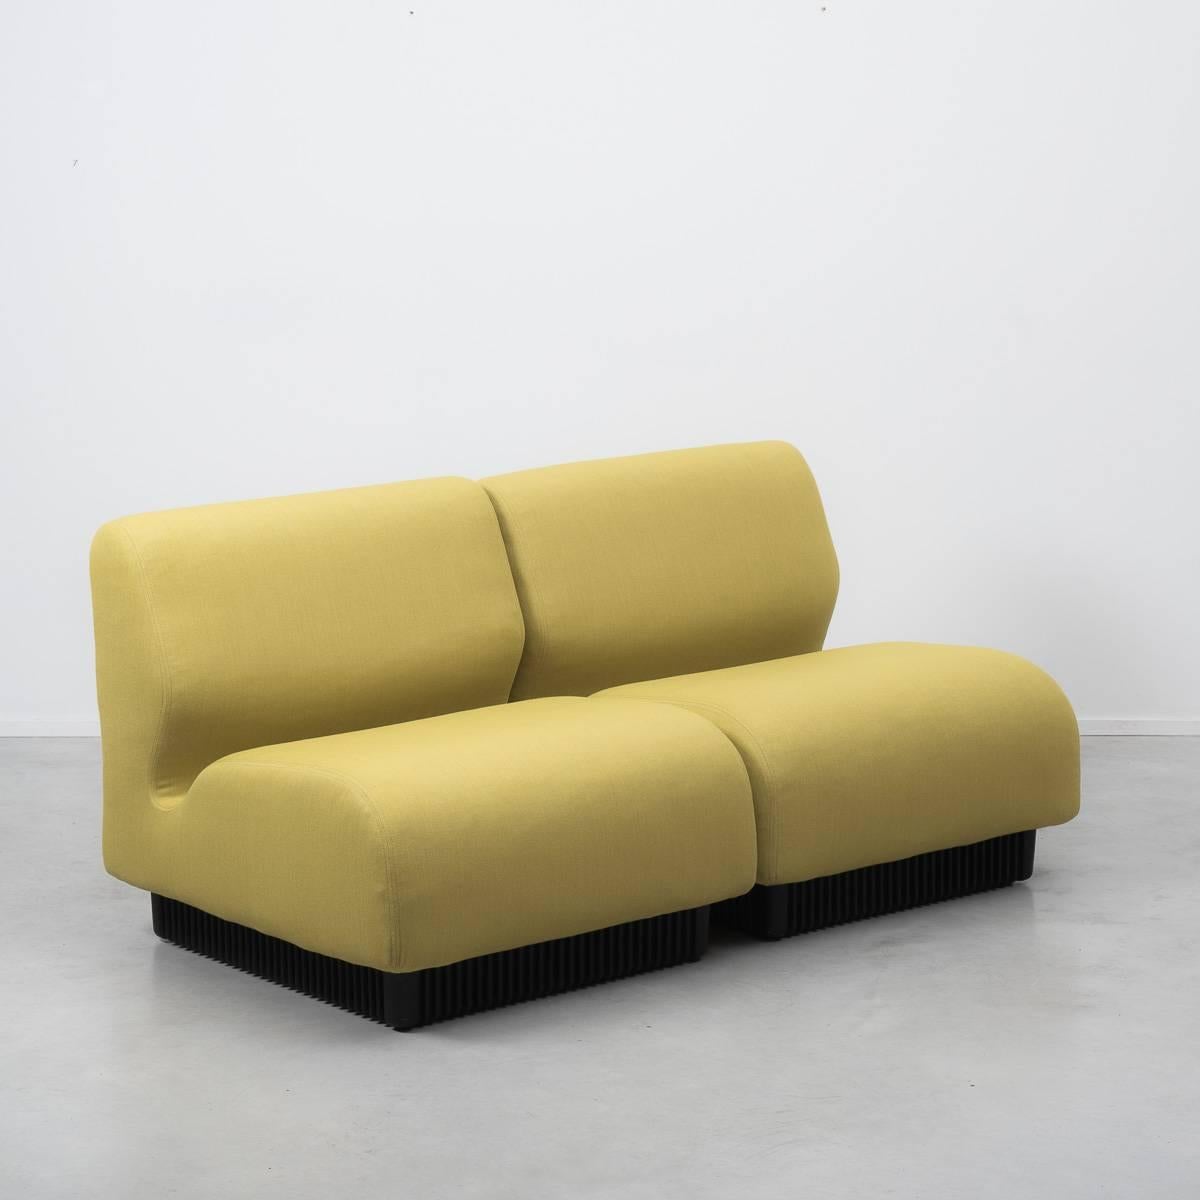 Don Chadwick, designer and educator, is one of the world’s foremost furniture designers. Although best known for Aeron and Equa desk chairs. This vibrant two-piece modular sofa was manufactured by Herman Miller in the 1970s. It consists of two